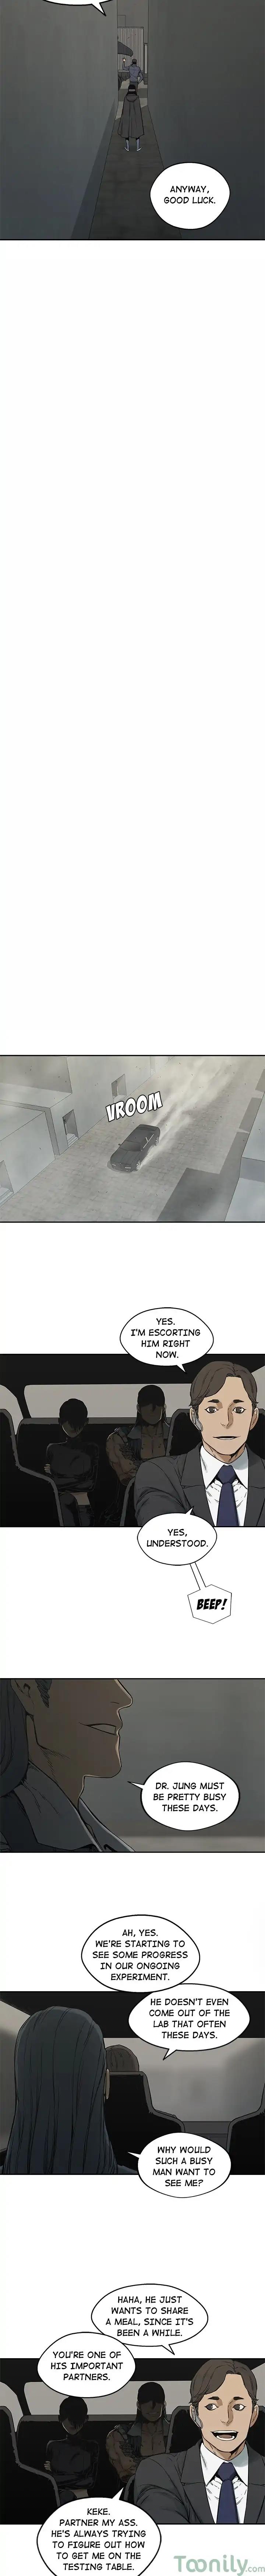 Delivery Knight Episode 24